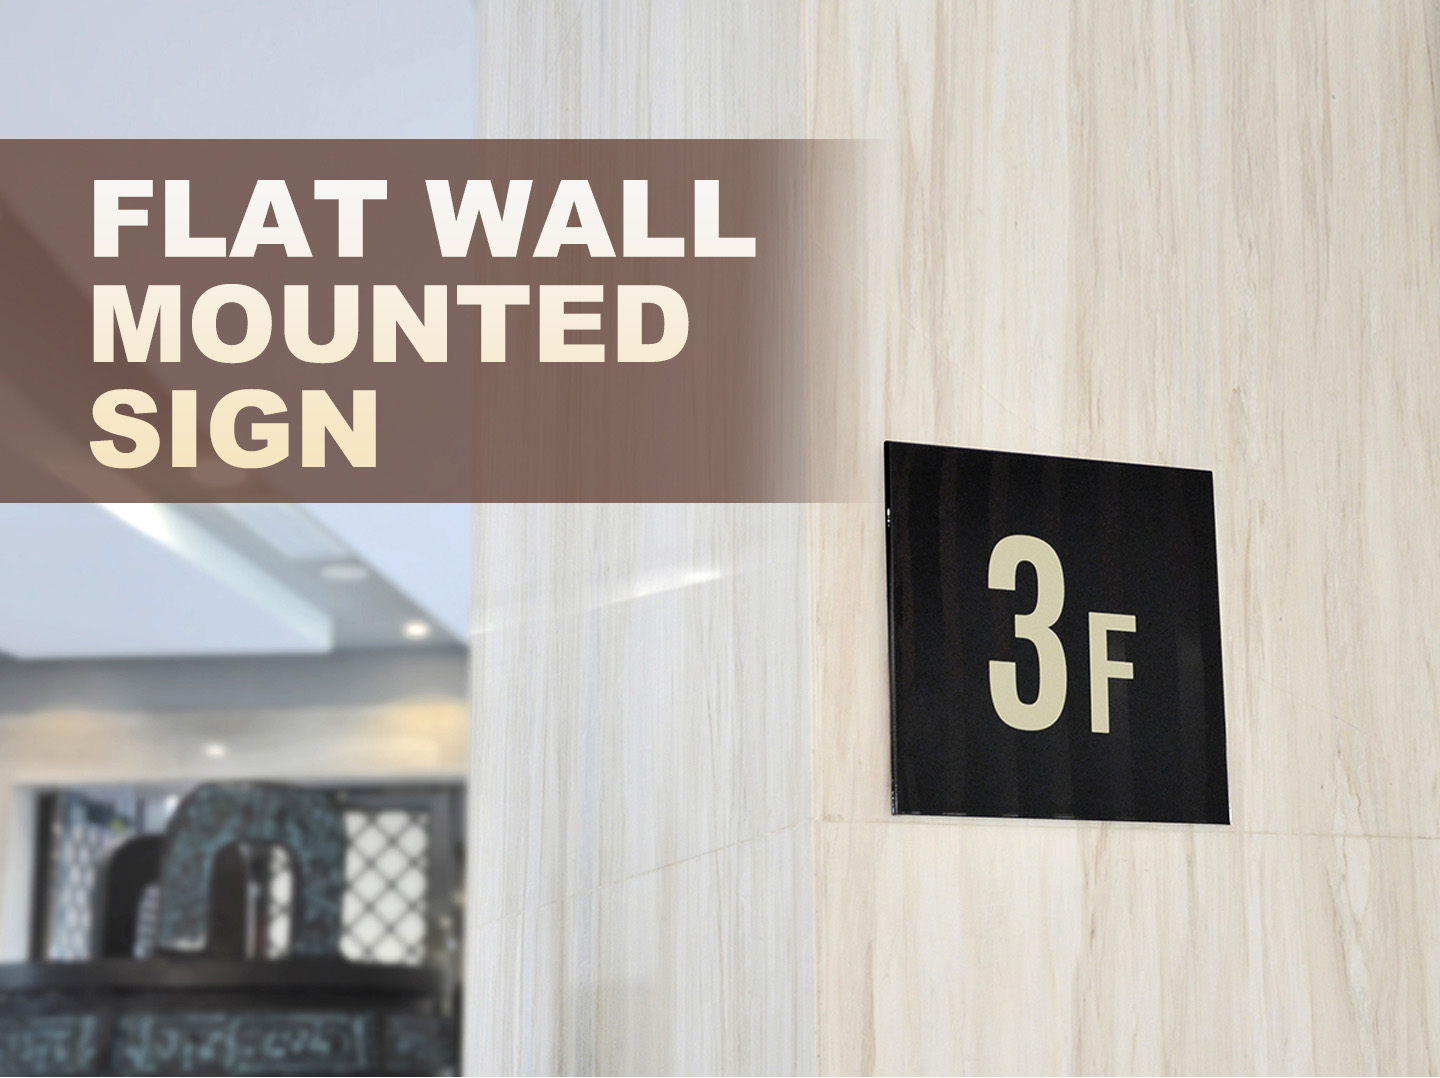 Flat Wall Mounted Sign for sale